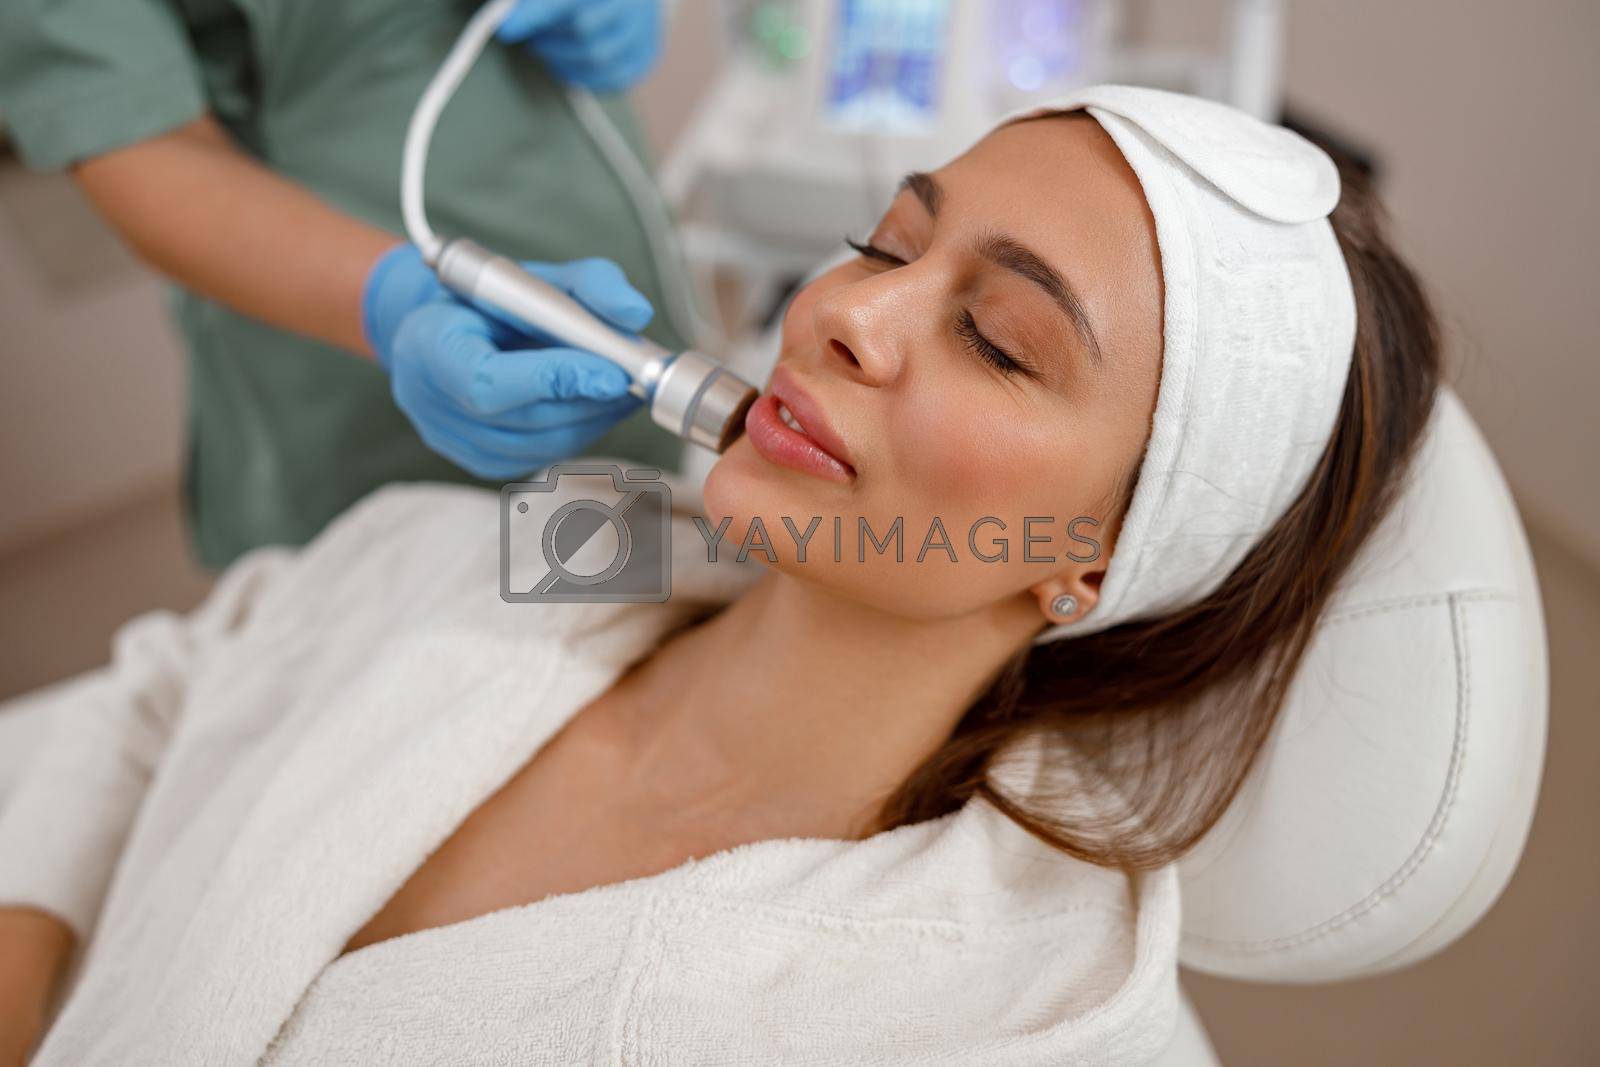 Royalty free image of Female client getting aesthetic facial skin treatment in beauty salon by Yaroslav_astakhov